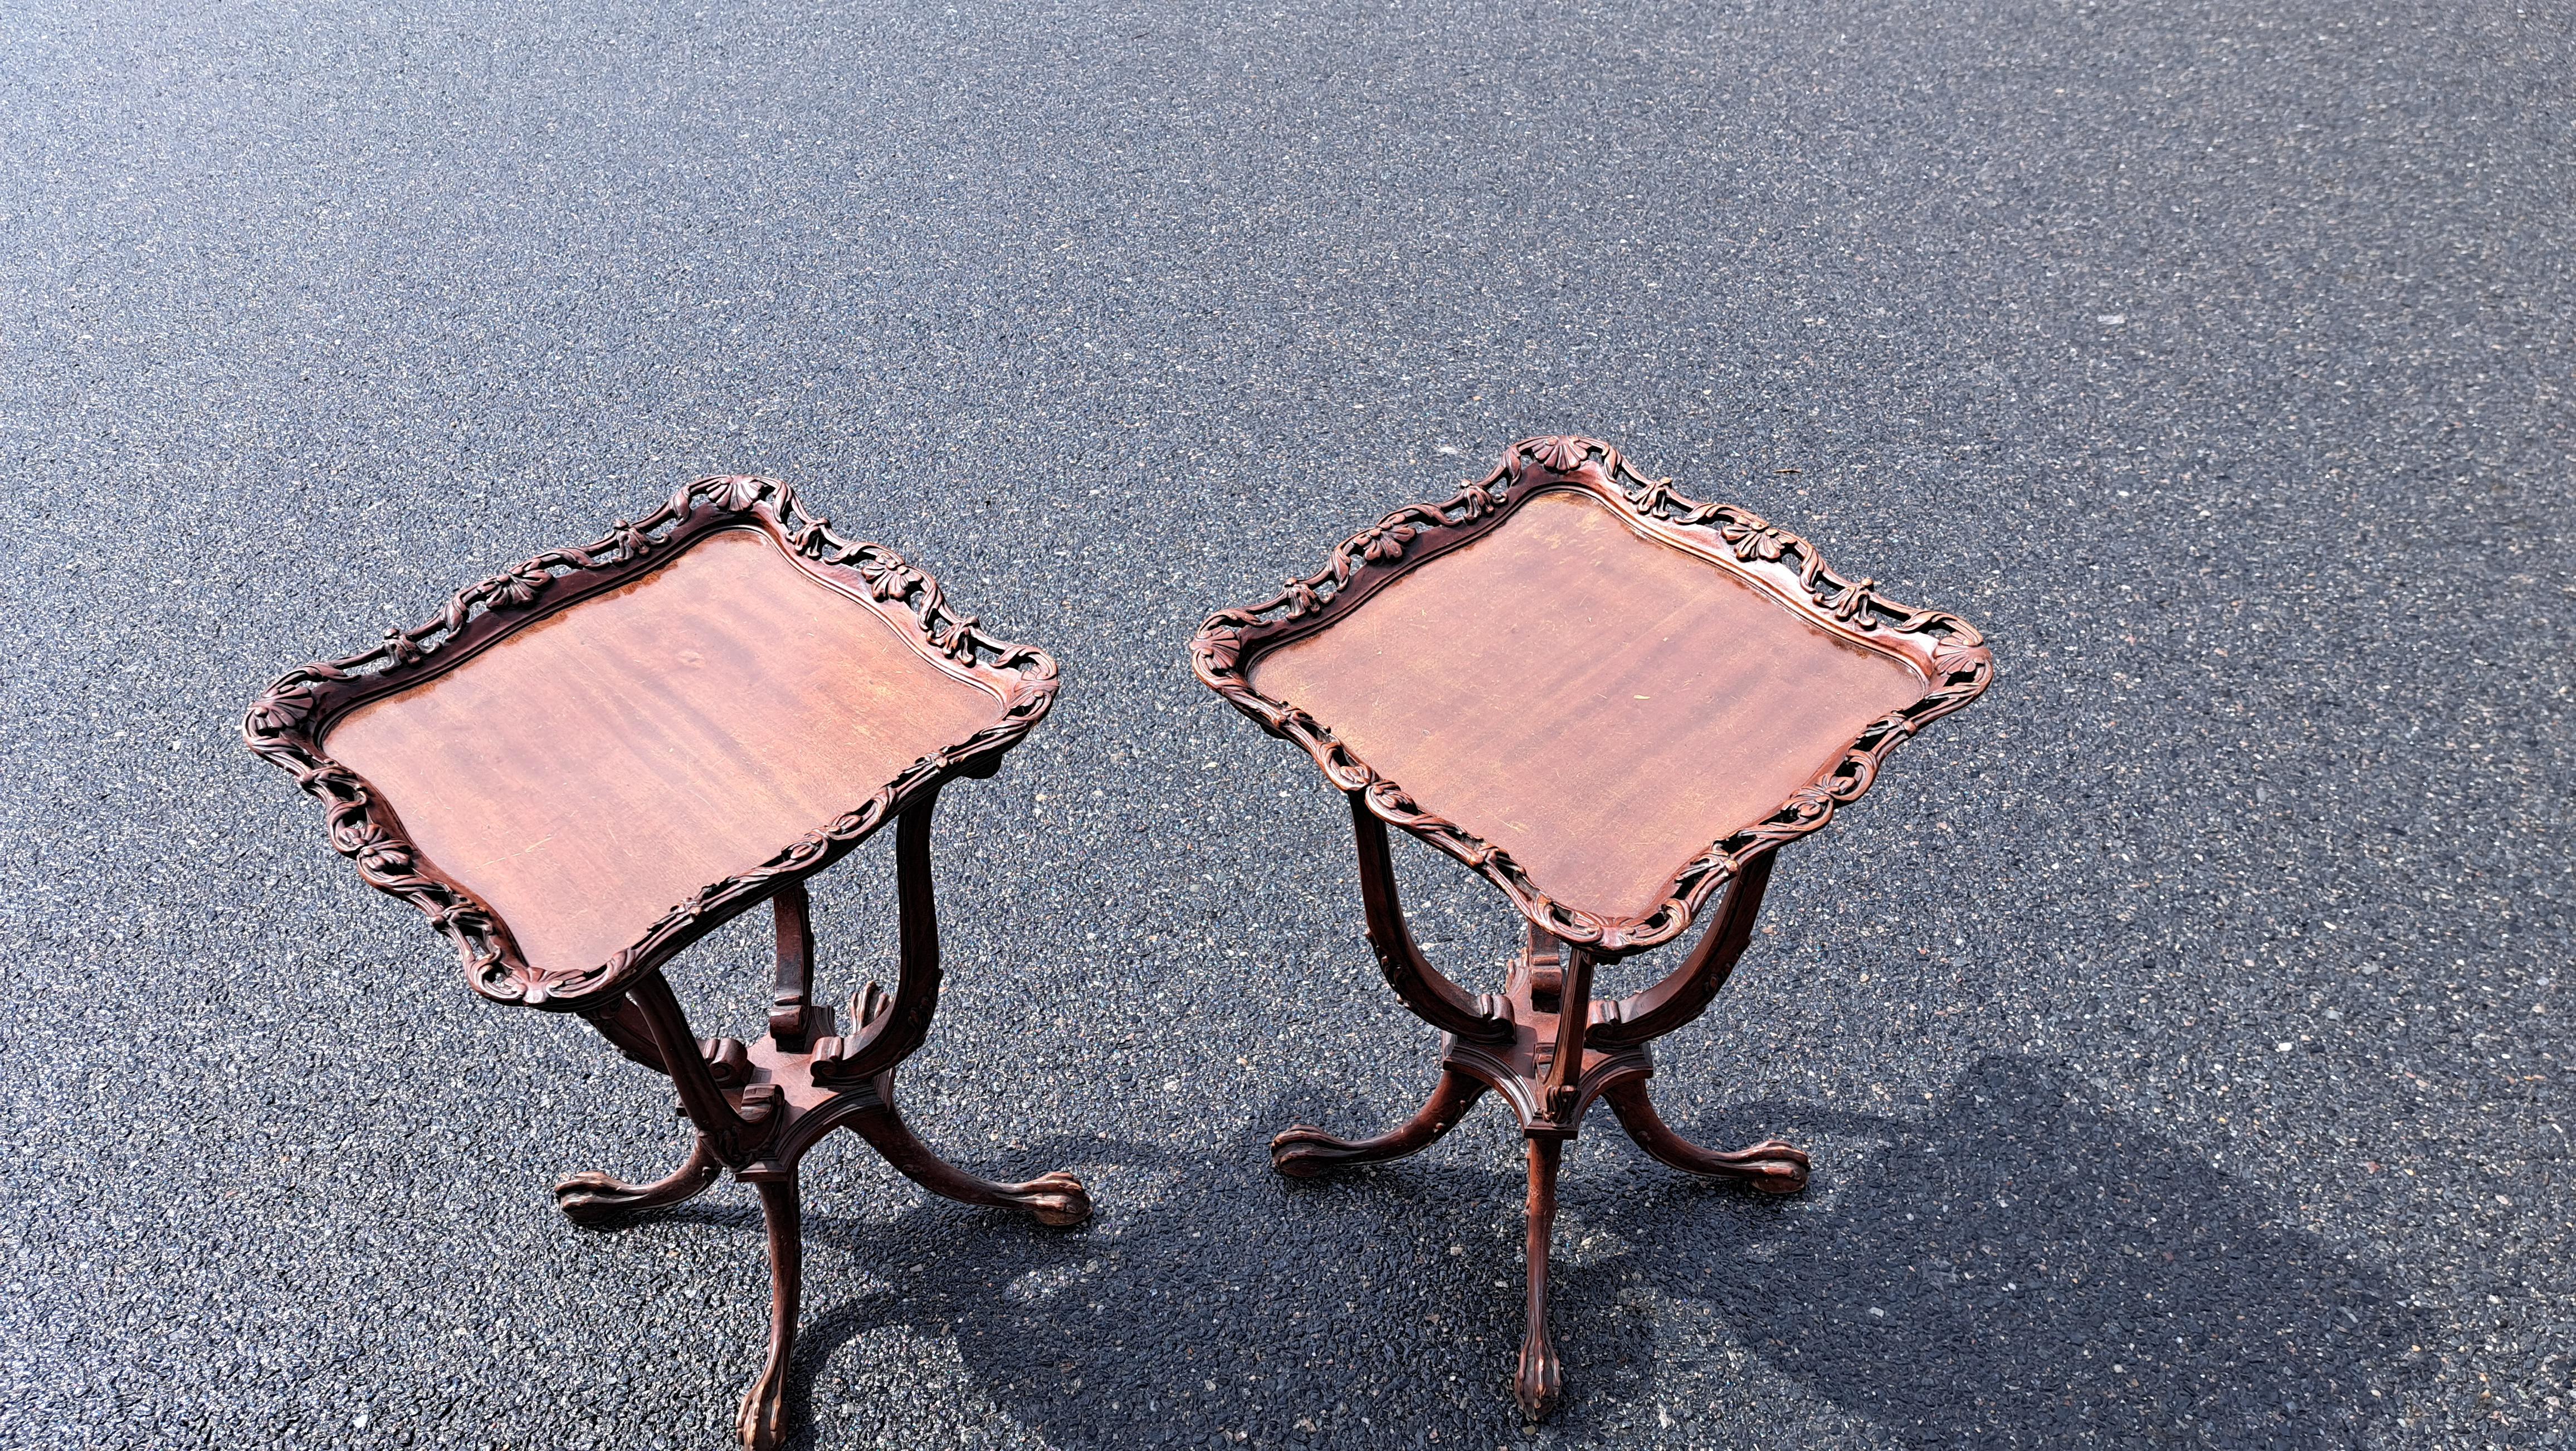 Pair of George III style mahogany side tables with four paw feet and carved details including open carving framing the table tops.